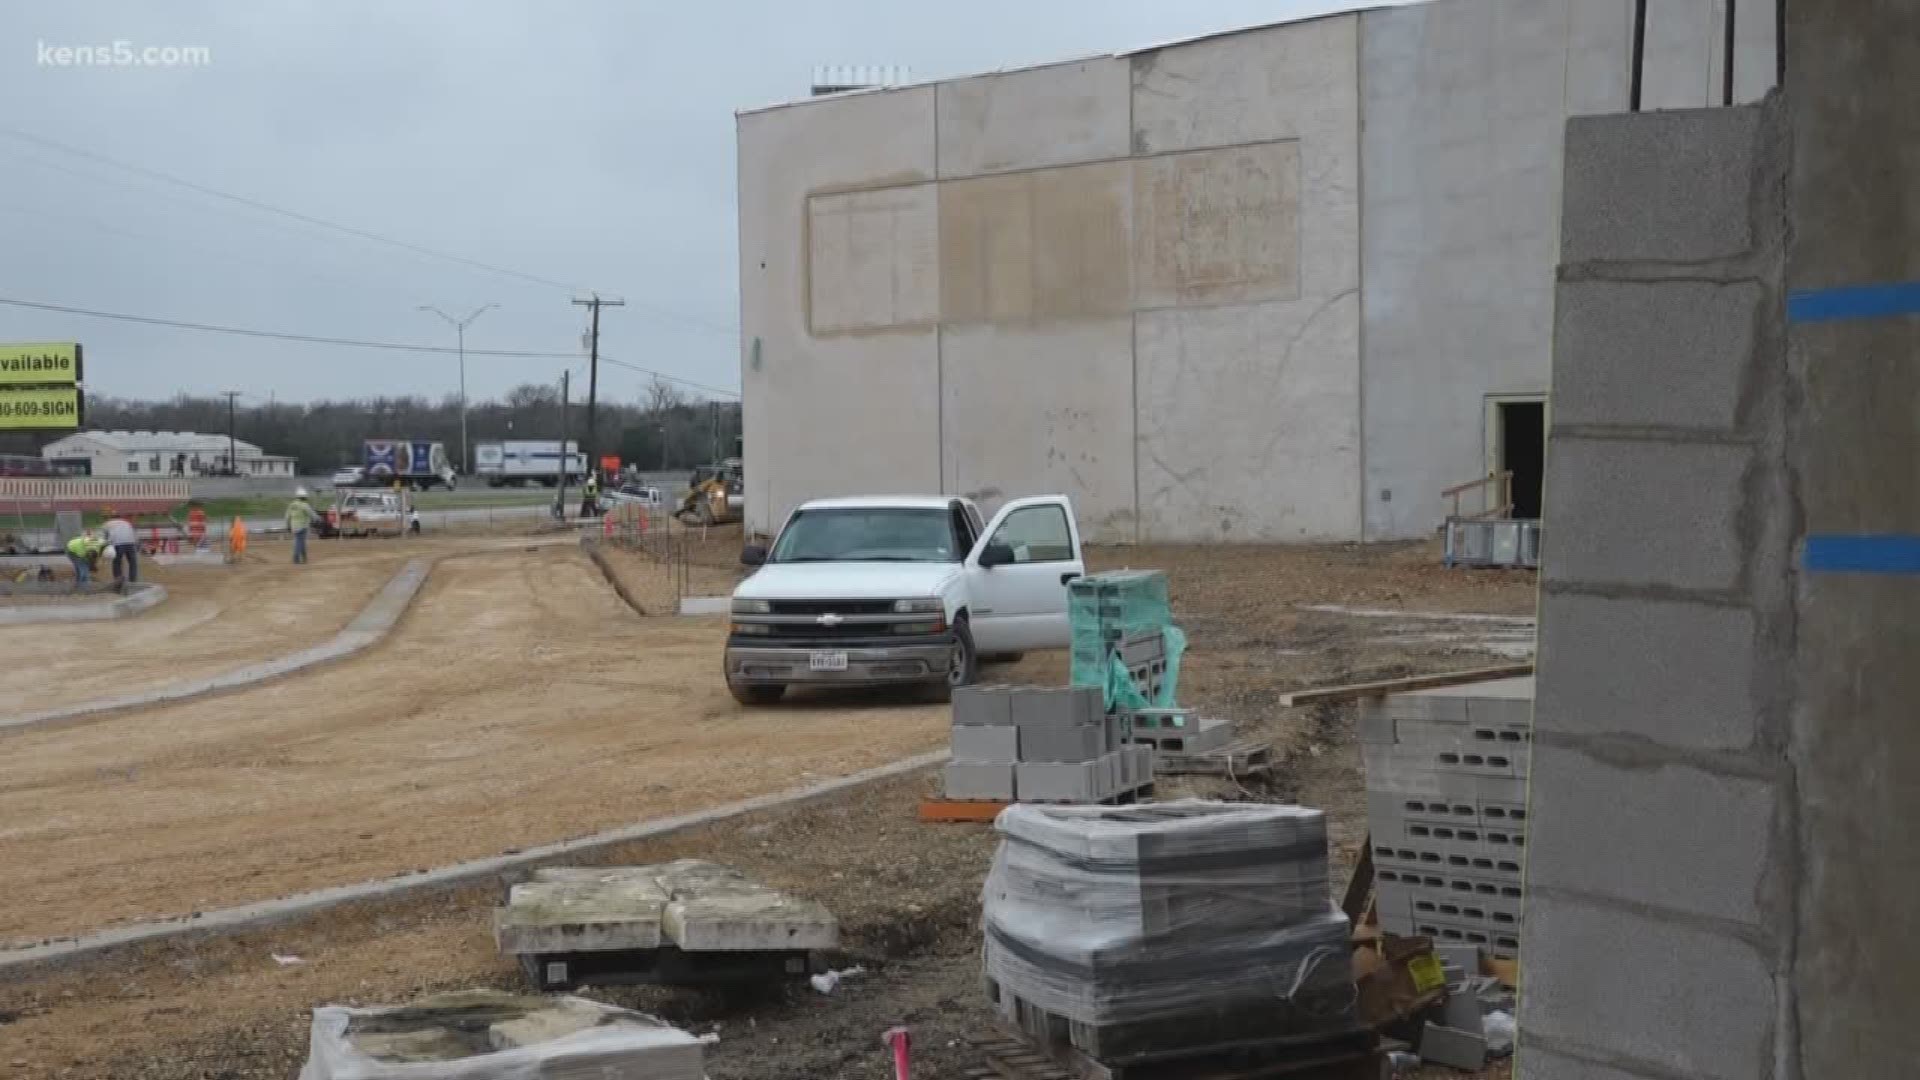 A new move-in date is announced for the Comal County Jail. The new facility has been under construction since 2017, and the completion date has changed several times